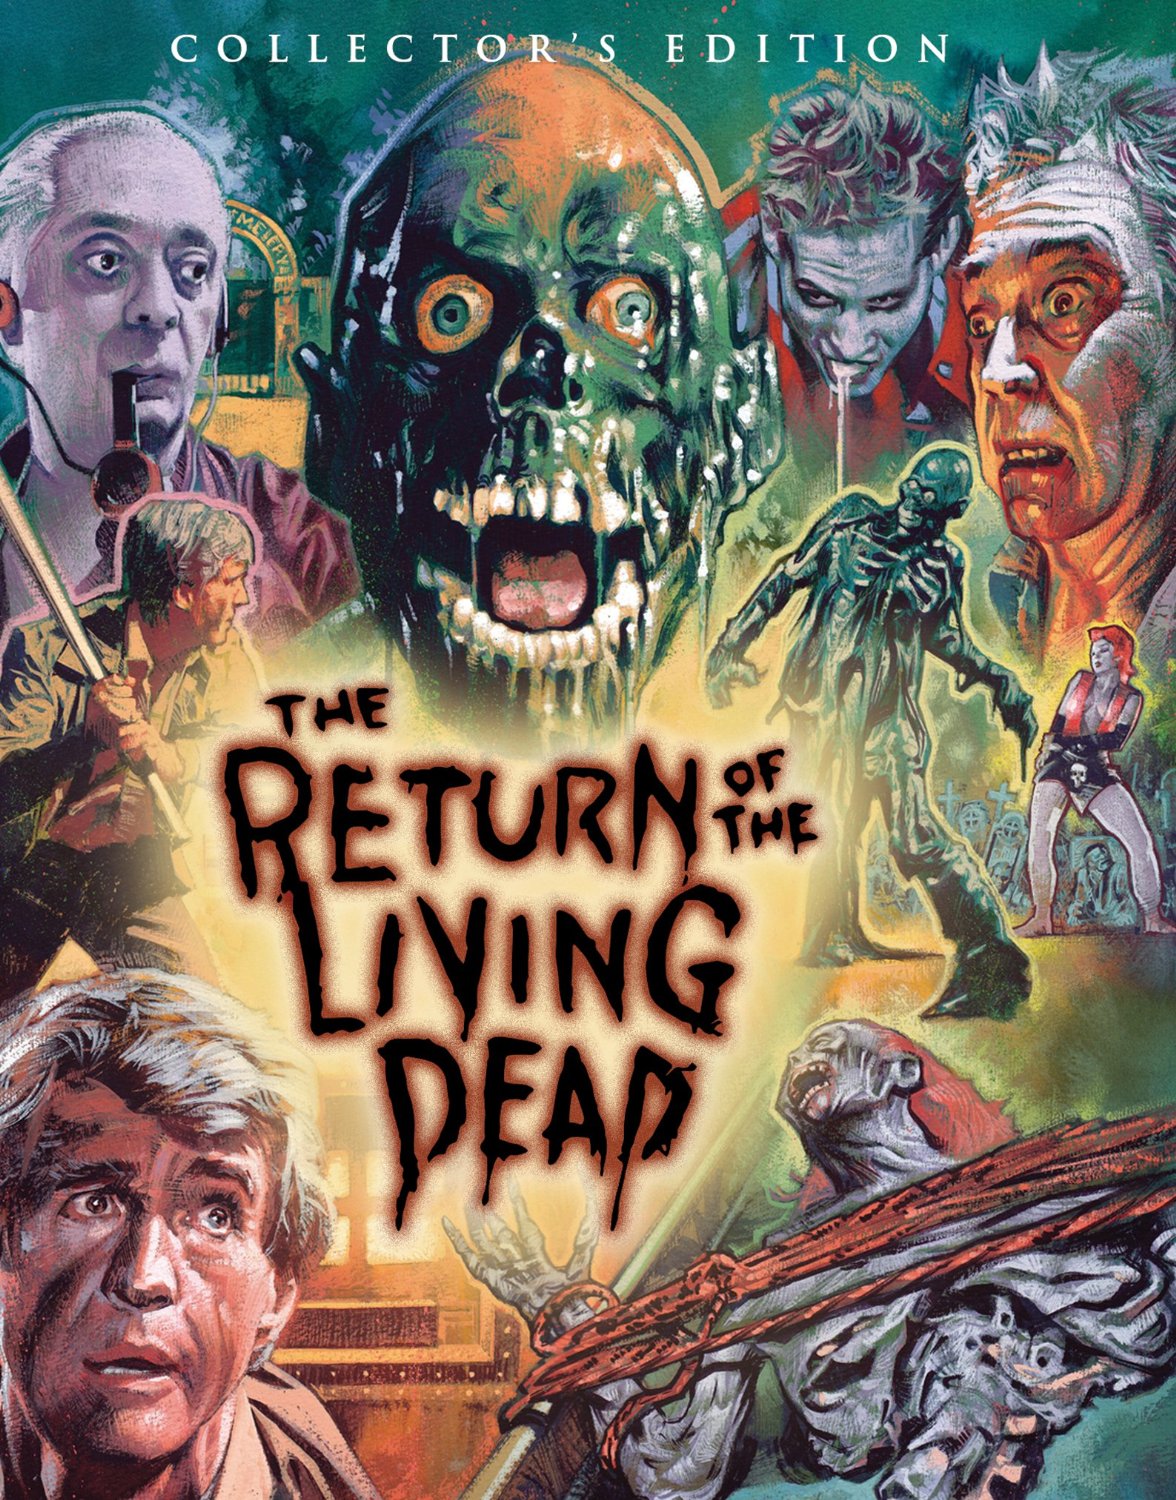 thereturnofthelivingdead-cover.jpg